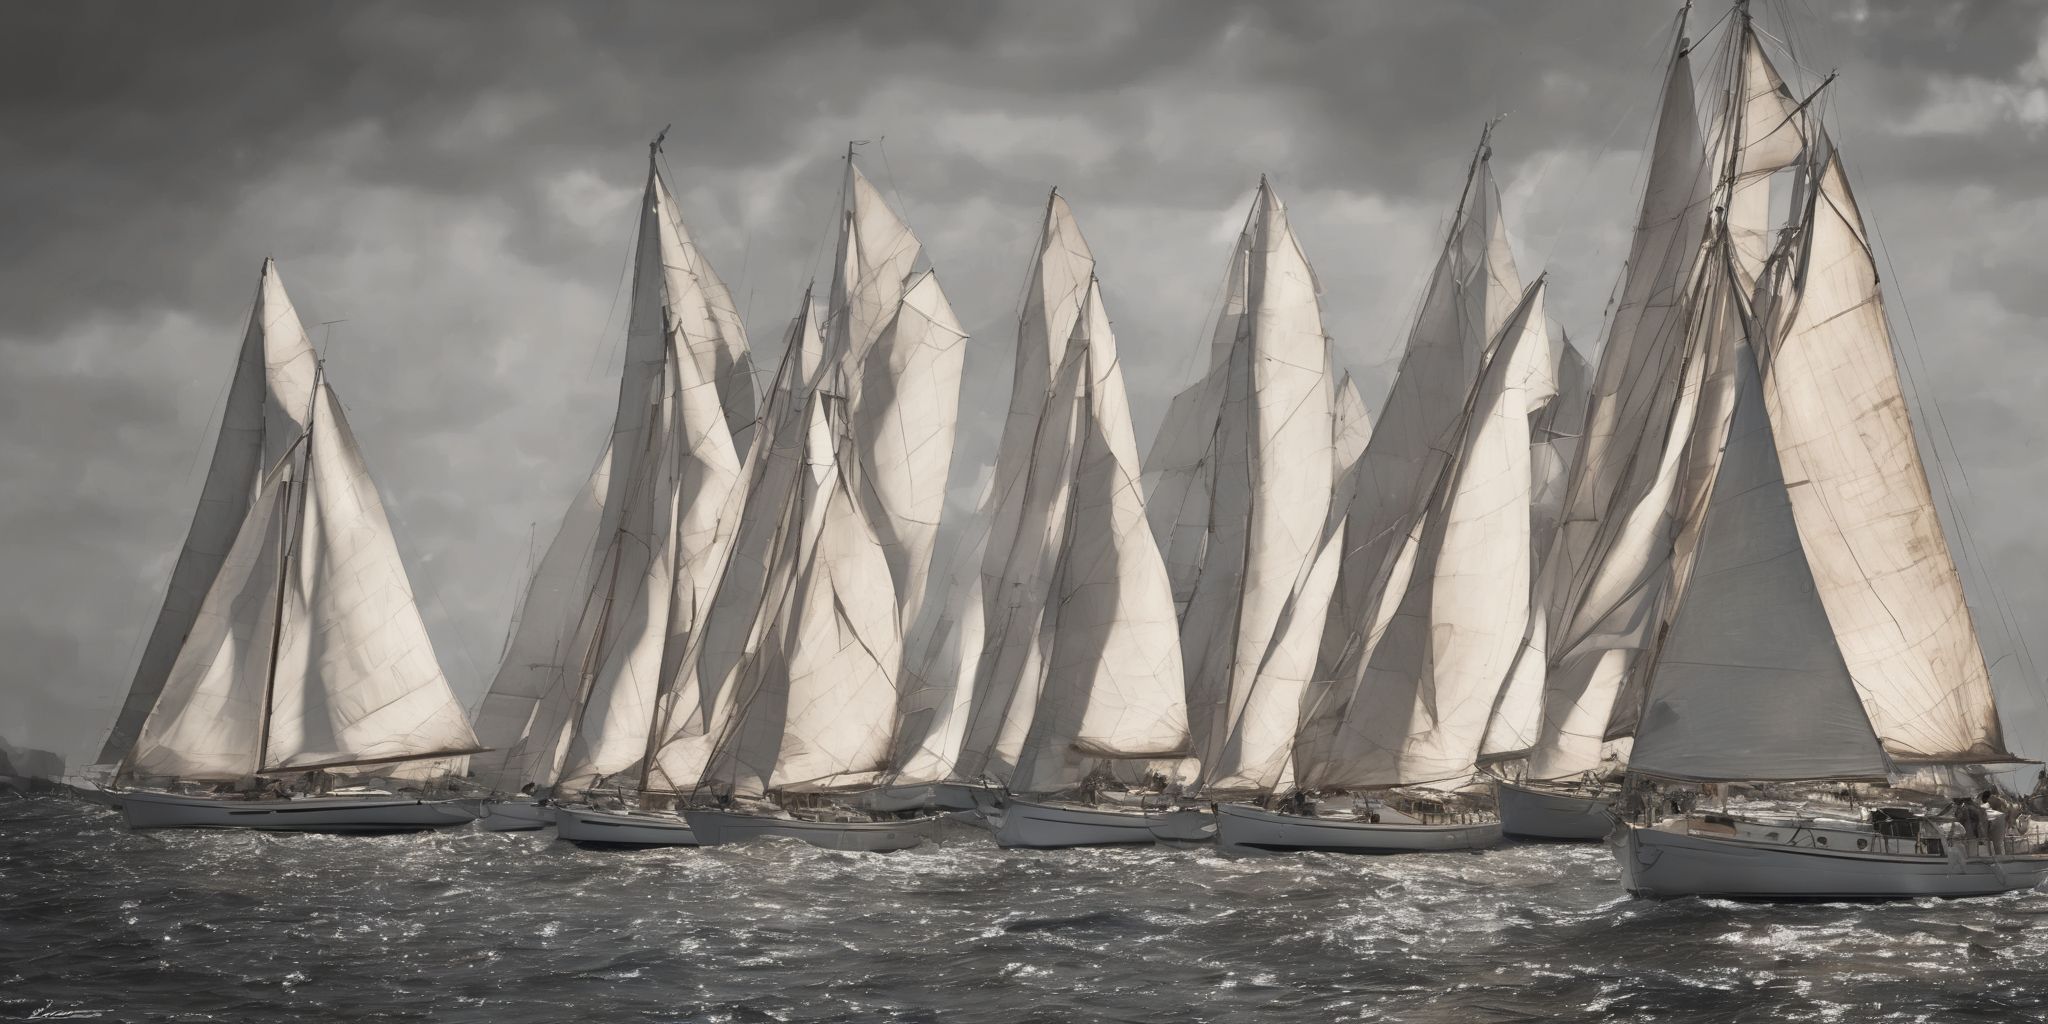 Sails  in realistic, photographic style